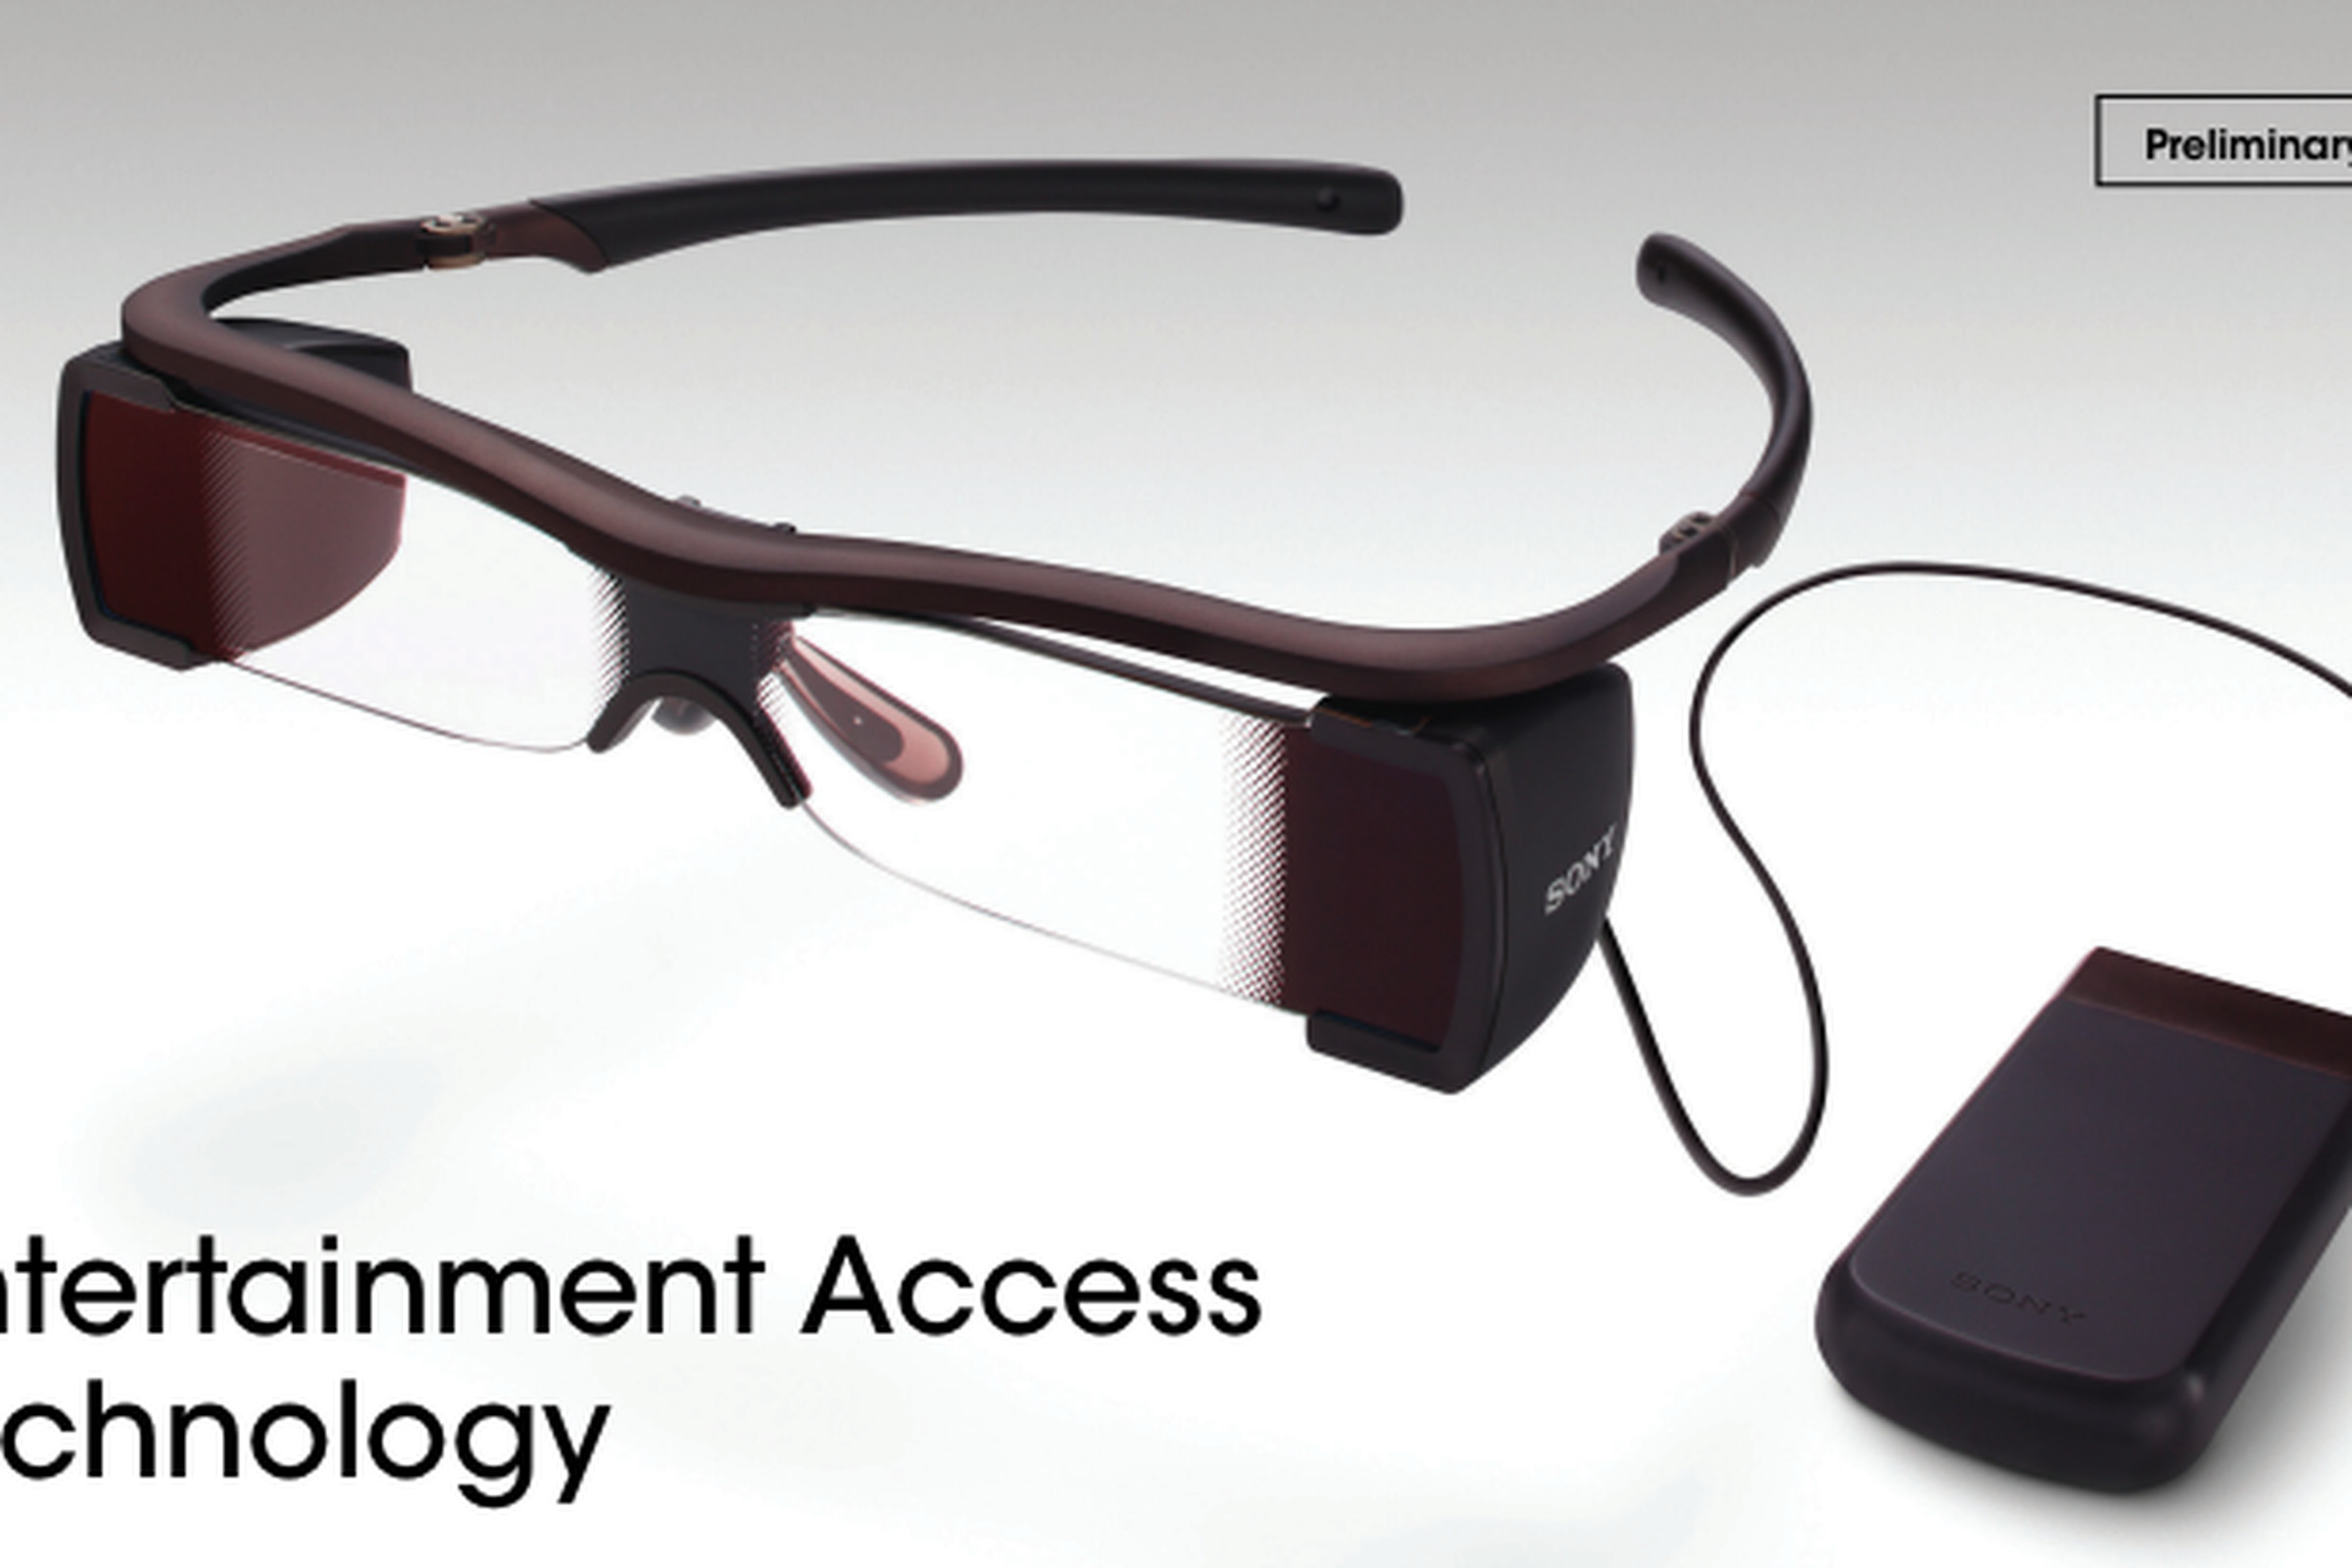 Sony Access Glasses